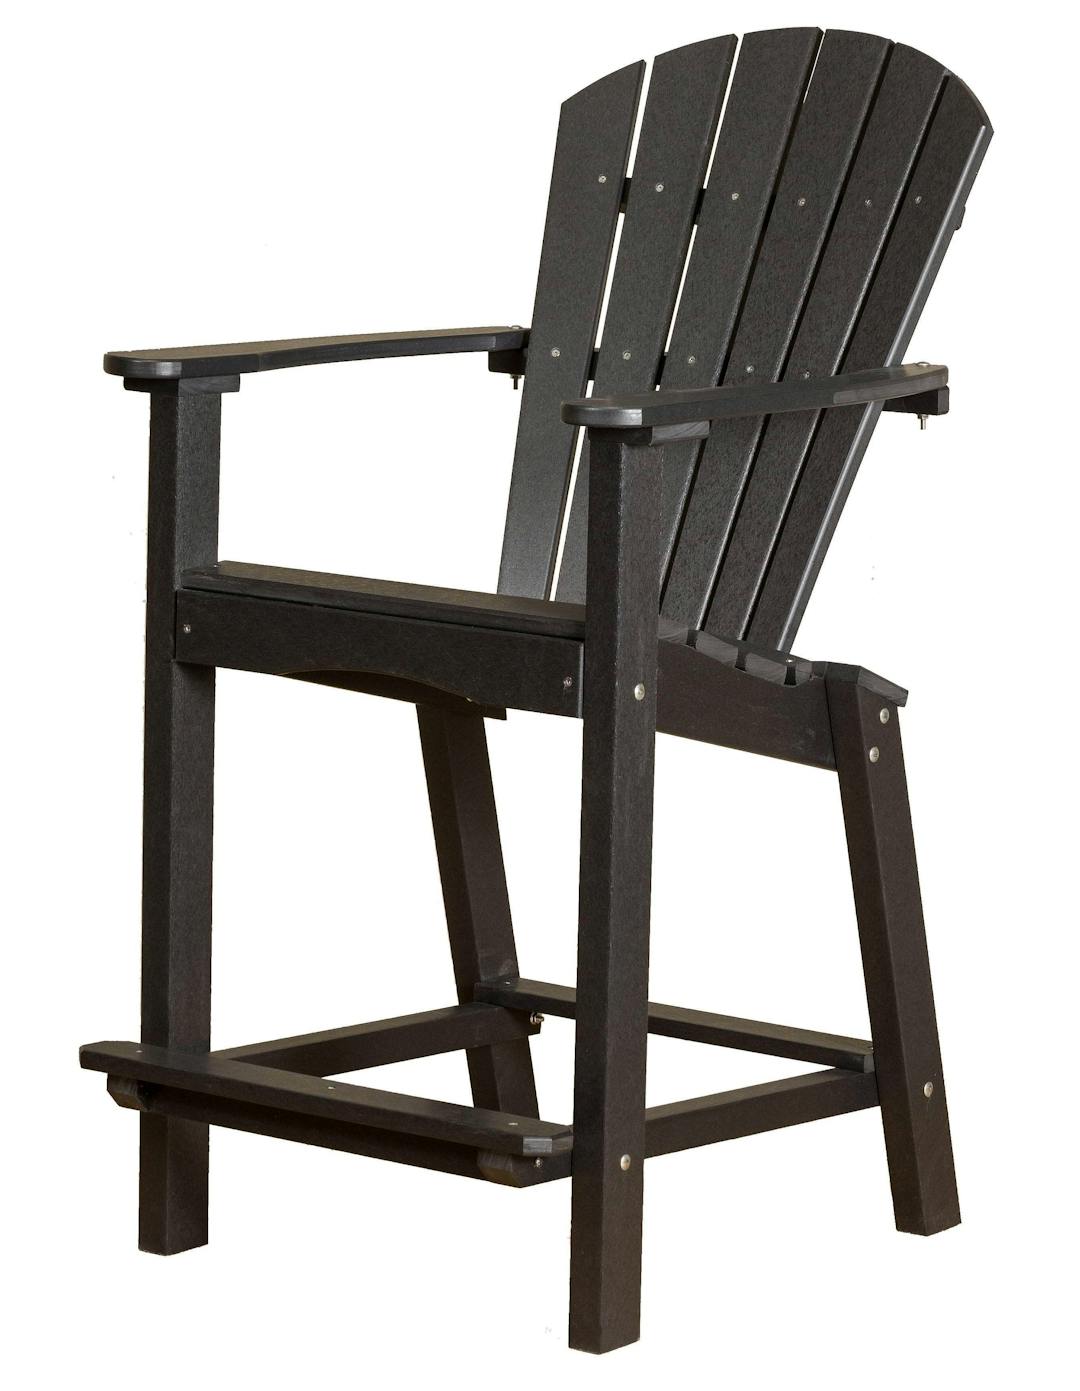 Classic 26" High Dining Chair